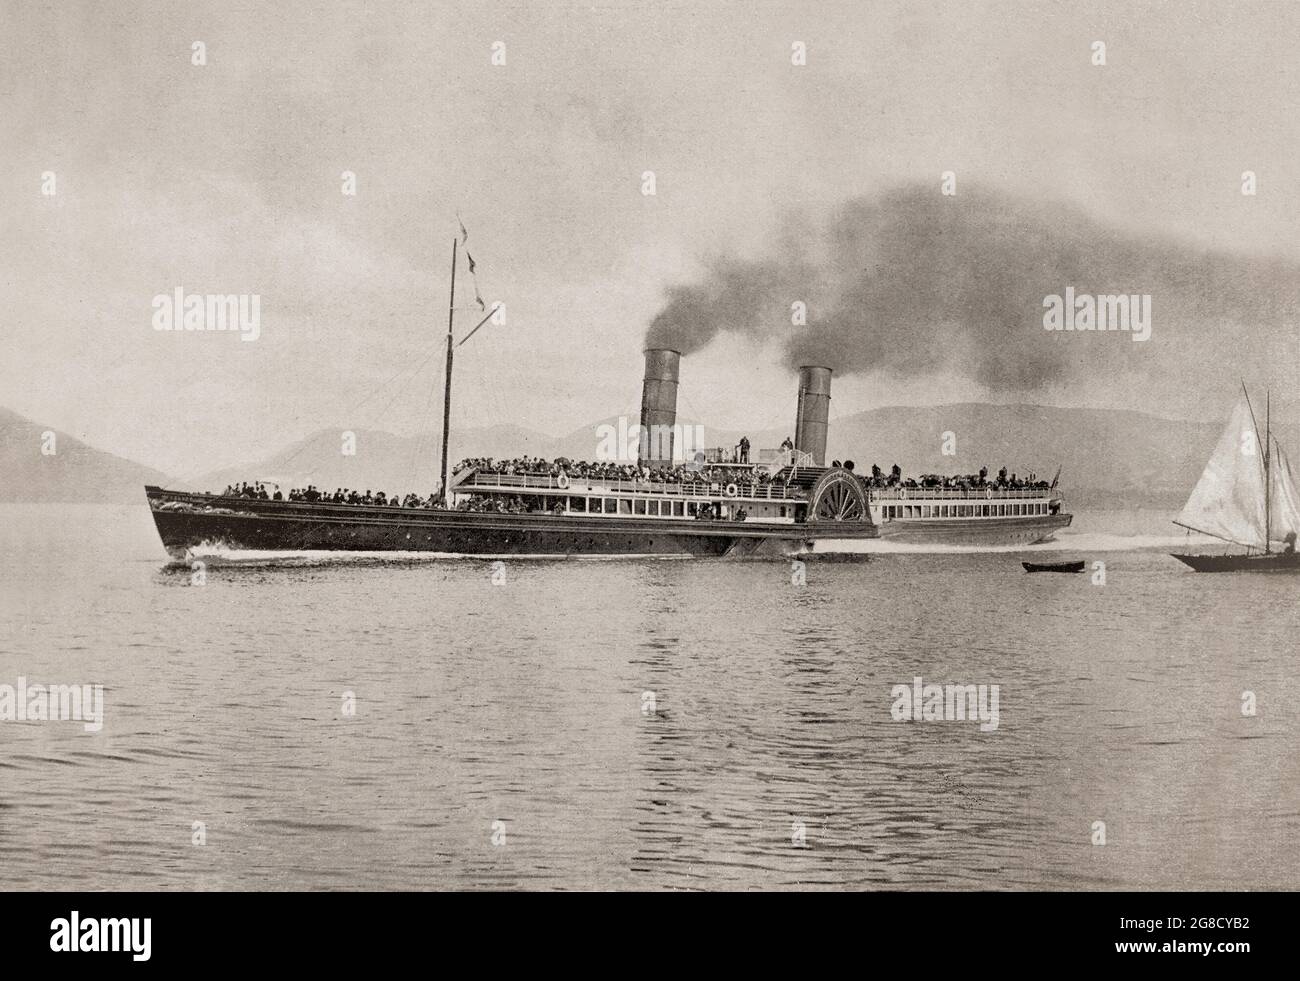 A late 19th century view of RMS Columba, a Clyde paddle steamer, that ran the first leg of 'The Royal Route' to Ardrishaig calling at Rothesay and the Kyles of Bute for fifty eight summers. She was built by J & G Thomson of Clydebank, and was the flagship of the MacBrayne fleet from 1879 to 1935 and often considered the finest Clyde steamer of all time. Stock Photo